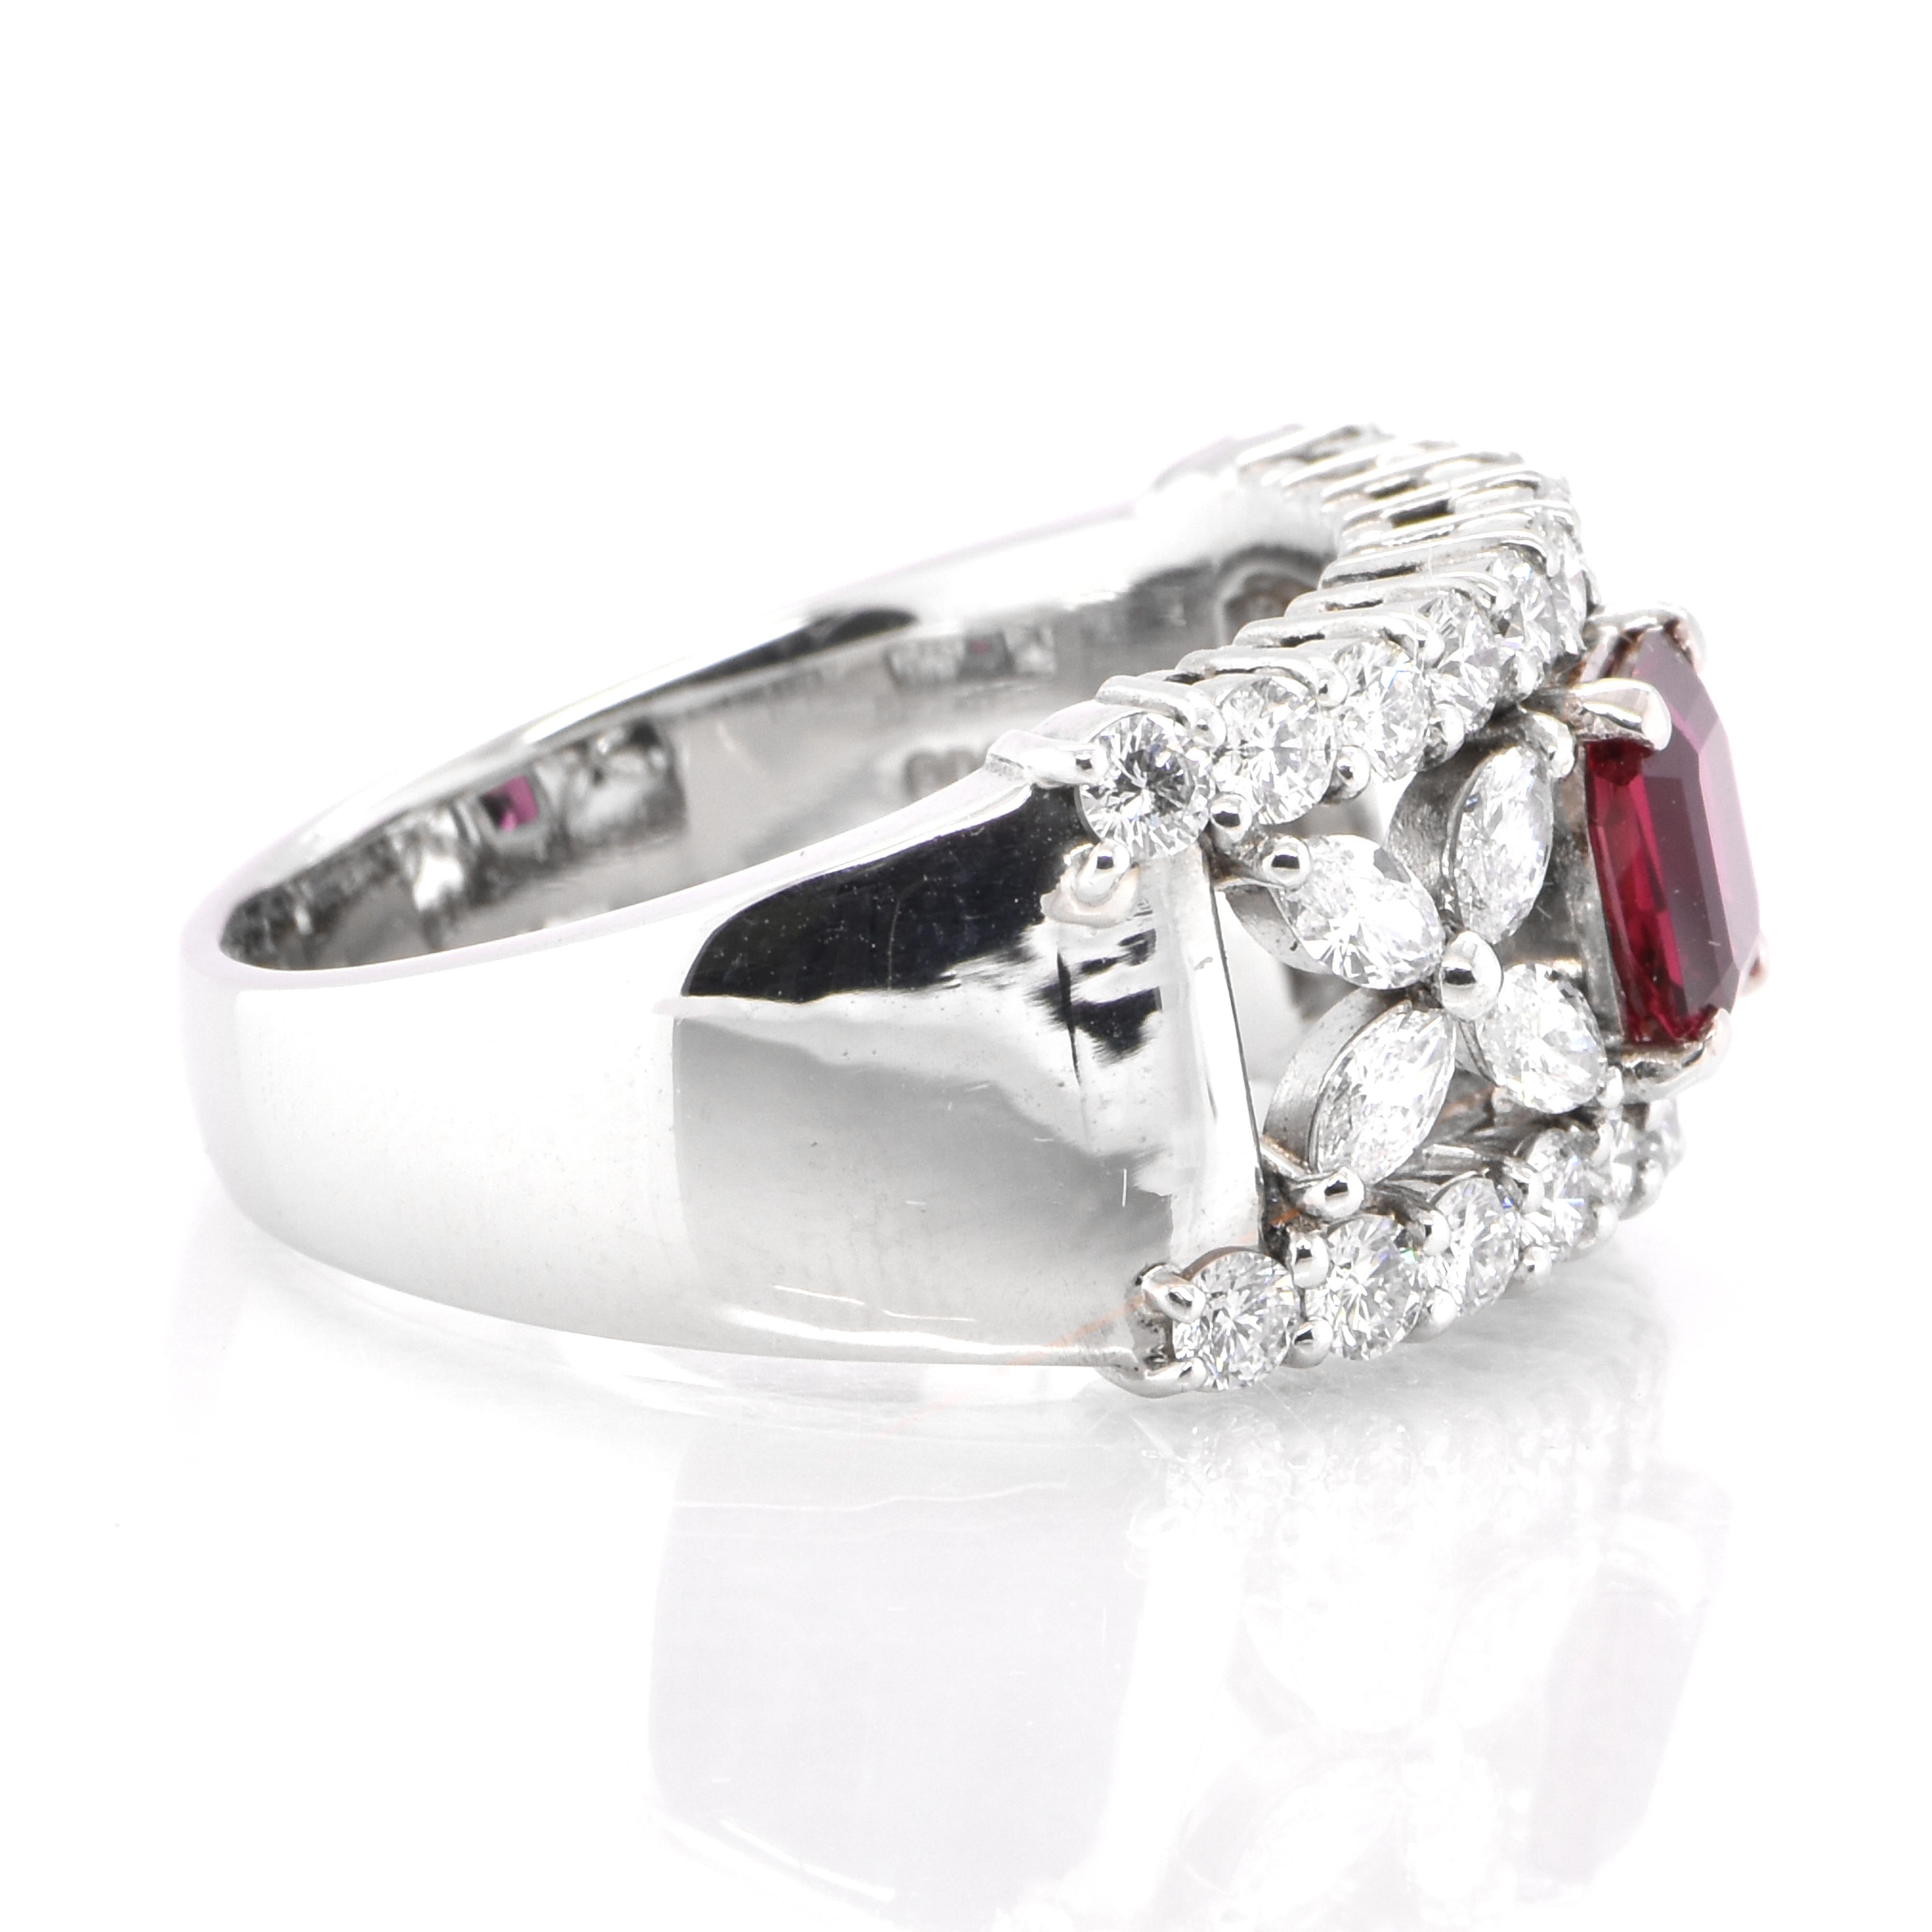 Modern GIA Certified 1.32 Carat Natural Siam, Untreated Ruby Ring Set in Platinum